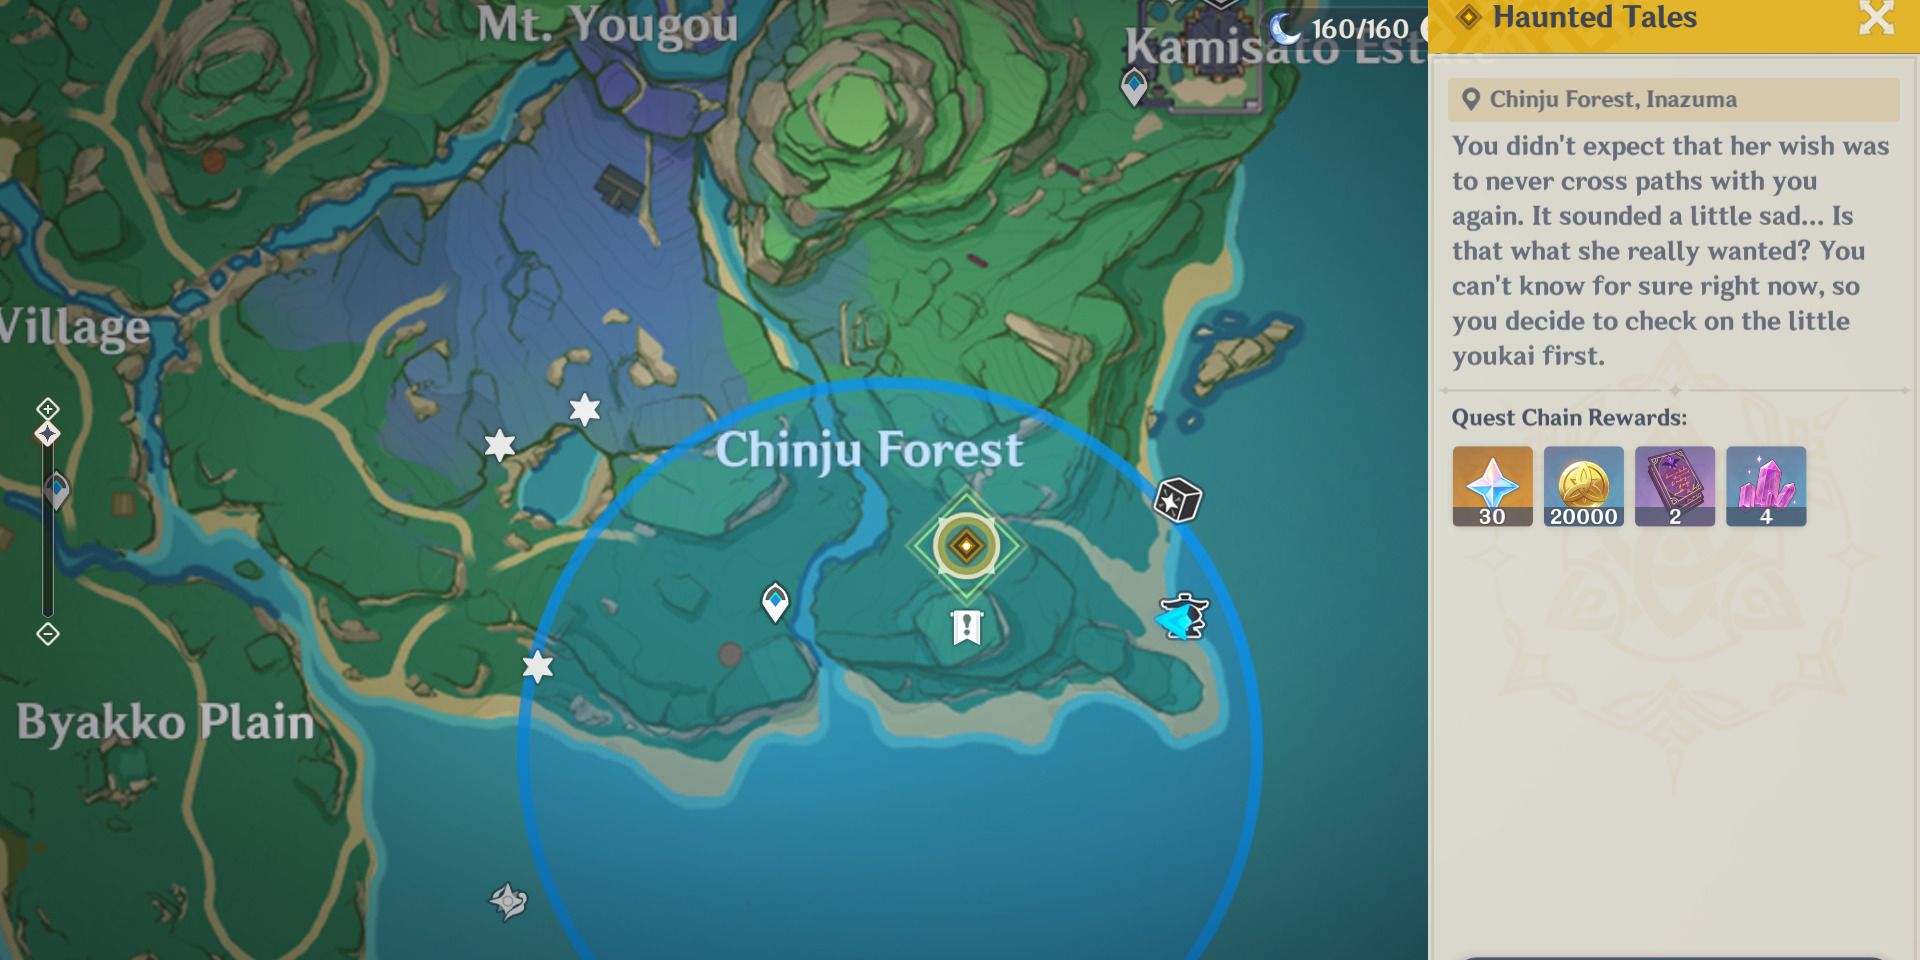 Image of the Test of Courage location on the map for the Haunted Tales quest in Genshin Impact.